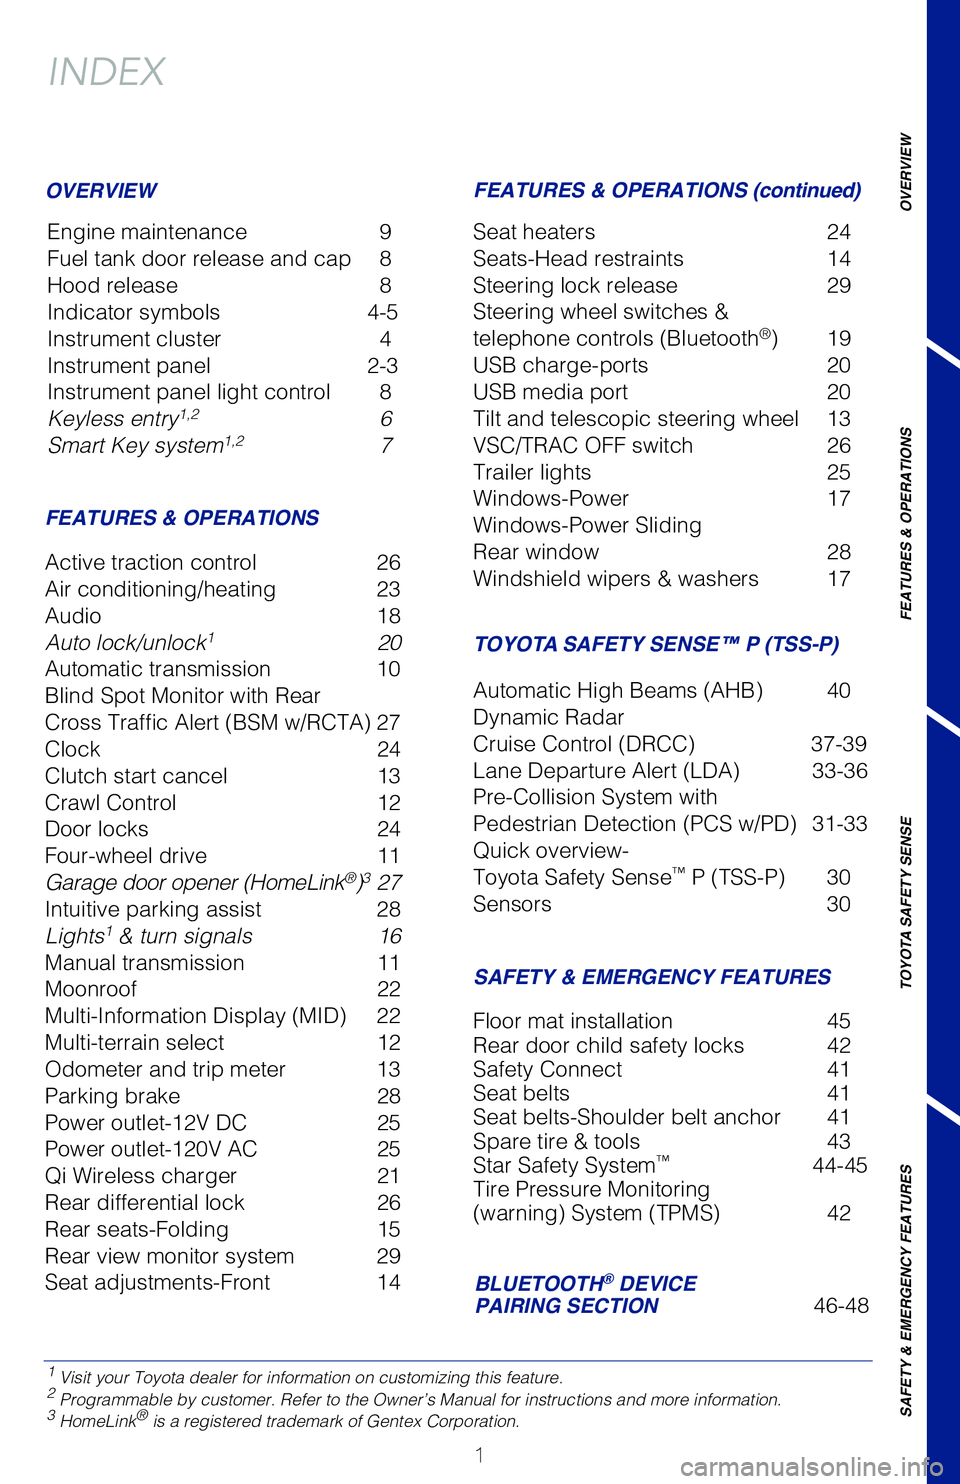 TOYOTA TACOMA 2020  Owners Manual (in English) 1
OVERVIEW
FEATURES & OPERATIONS
TOYOTA SAFETY SENSE
SAFETY & EMERGENCY FEATURES
1 Visit your Toyota dealer for information on customizing this feature.2 Programmable by customer. Refer to the Owner�